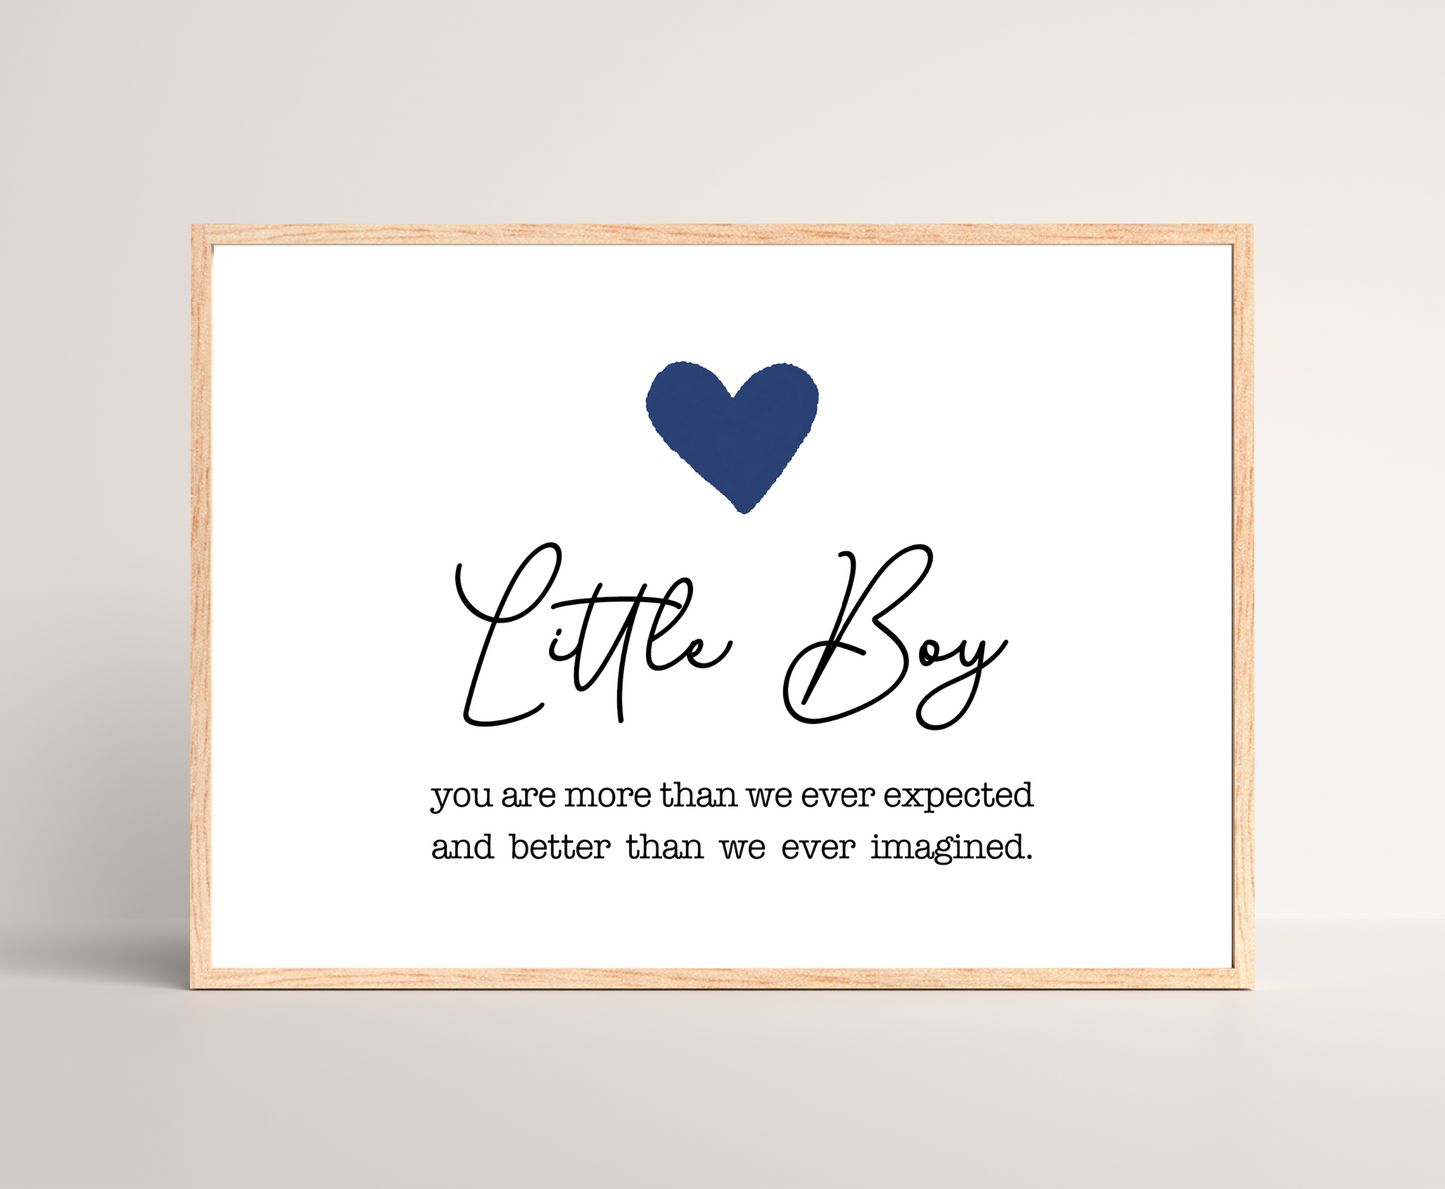 A frame displaying a dark blue heart with a piece of writing below that says: Little boy, you are more than we ever expected and better than we ever imagined.